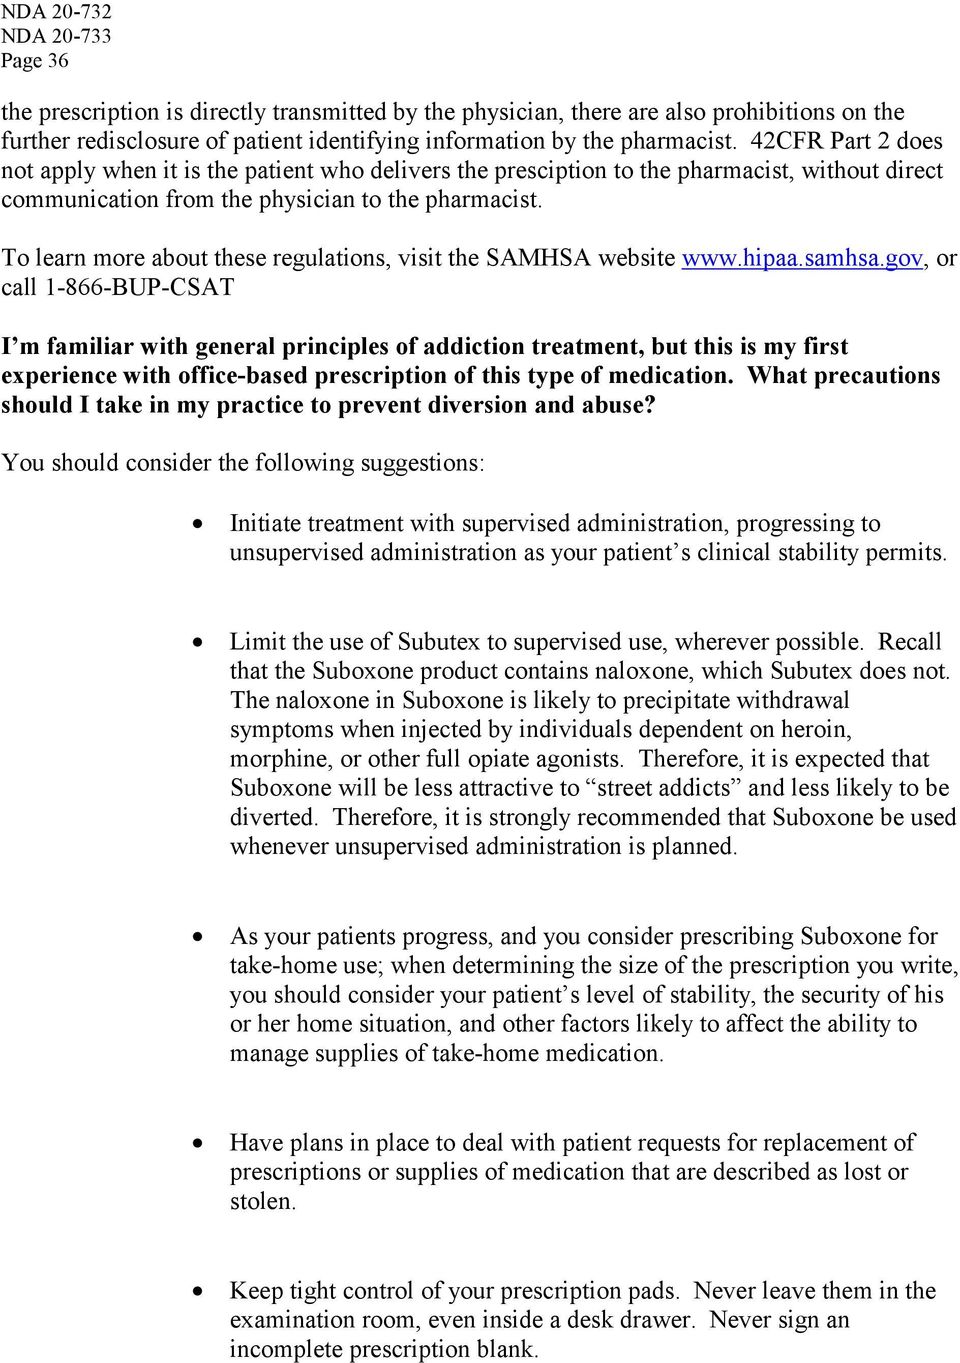 To learn more about these regulations, visit the SAMHSA website www.hipaa.samhsa.